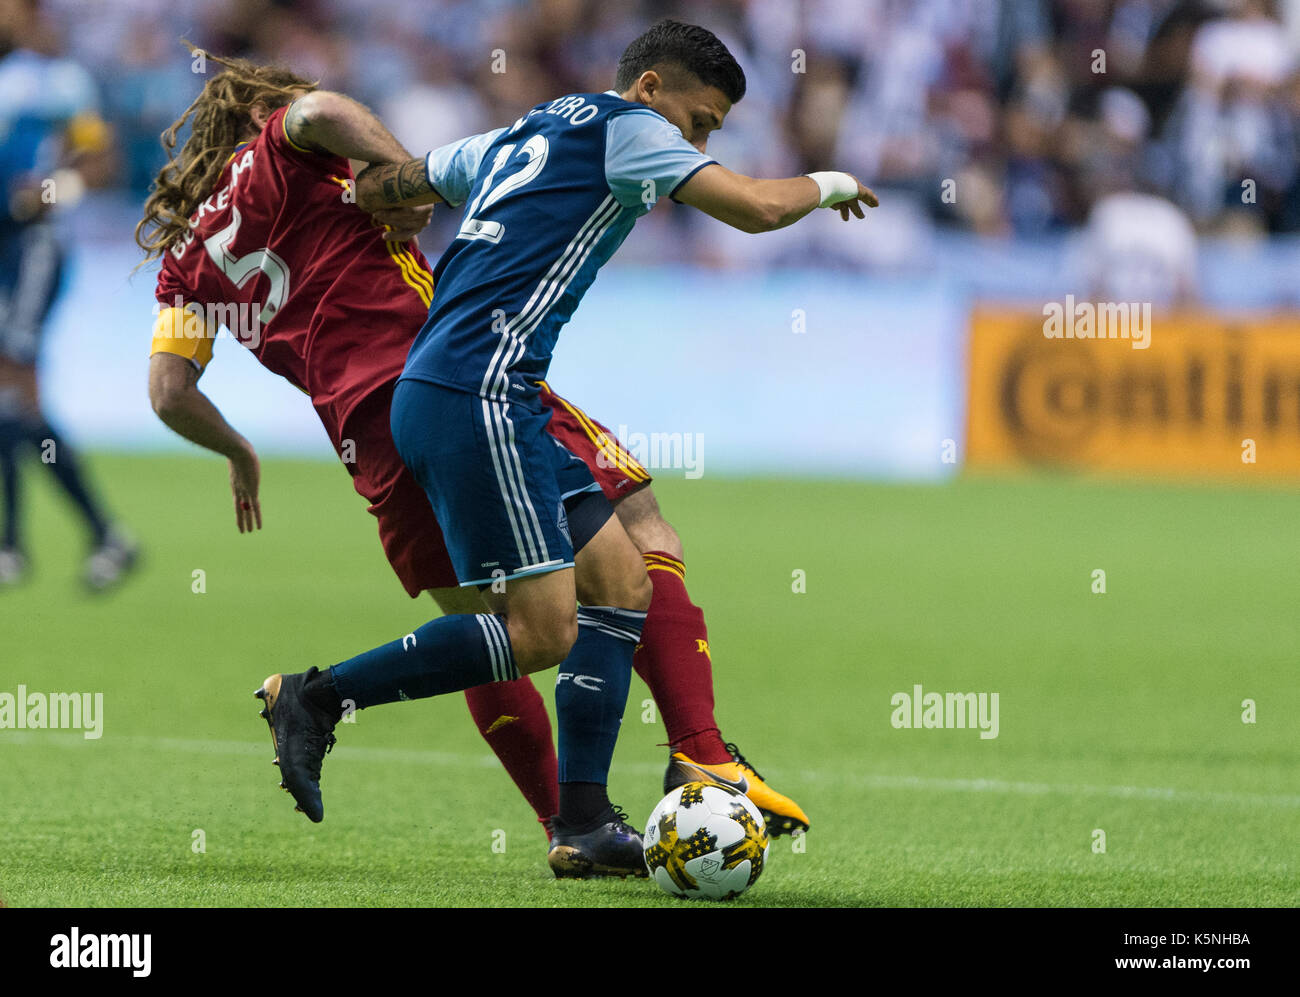 Vancouver, Canada. 9 September 2017. Fredy Montero (12) of Vancouver Whitecaps, fighting Kyle Beckerman (5) of Real Salt Lake, off the ball.  Vancouver defeats Real Salt Lake 3-2.Vancouver Whitecaps vs Real Salt Lake BC Place Stadium.  © Gerry Rousseau/Alamy Live News Stock Photo